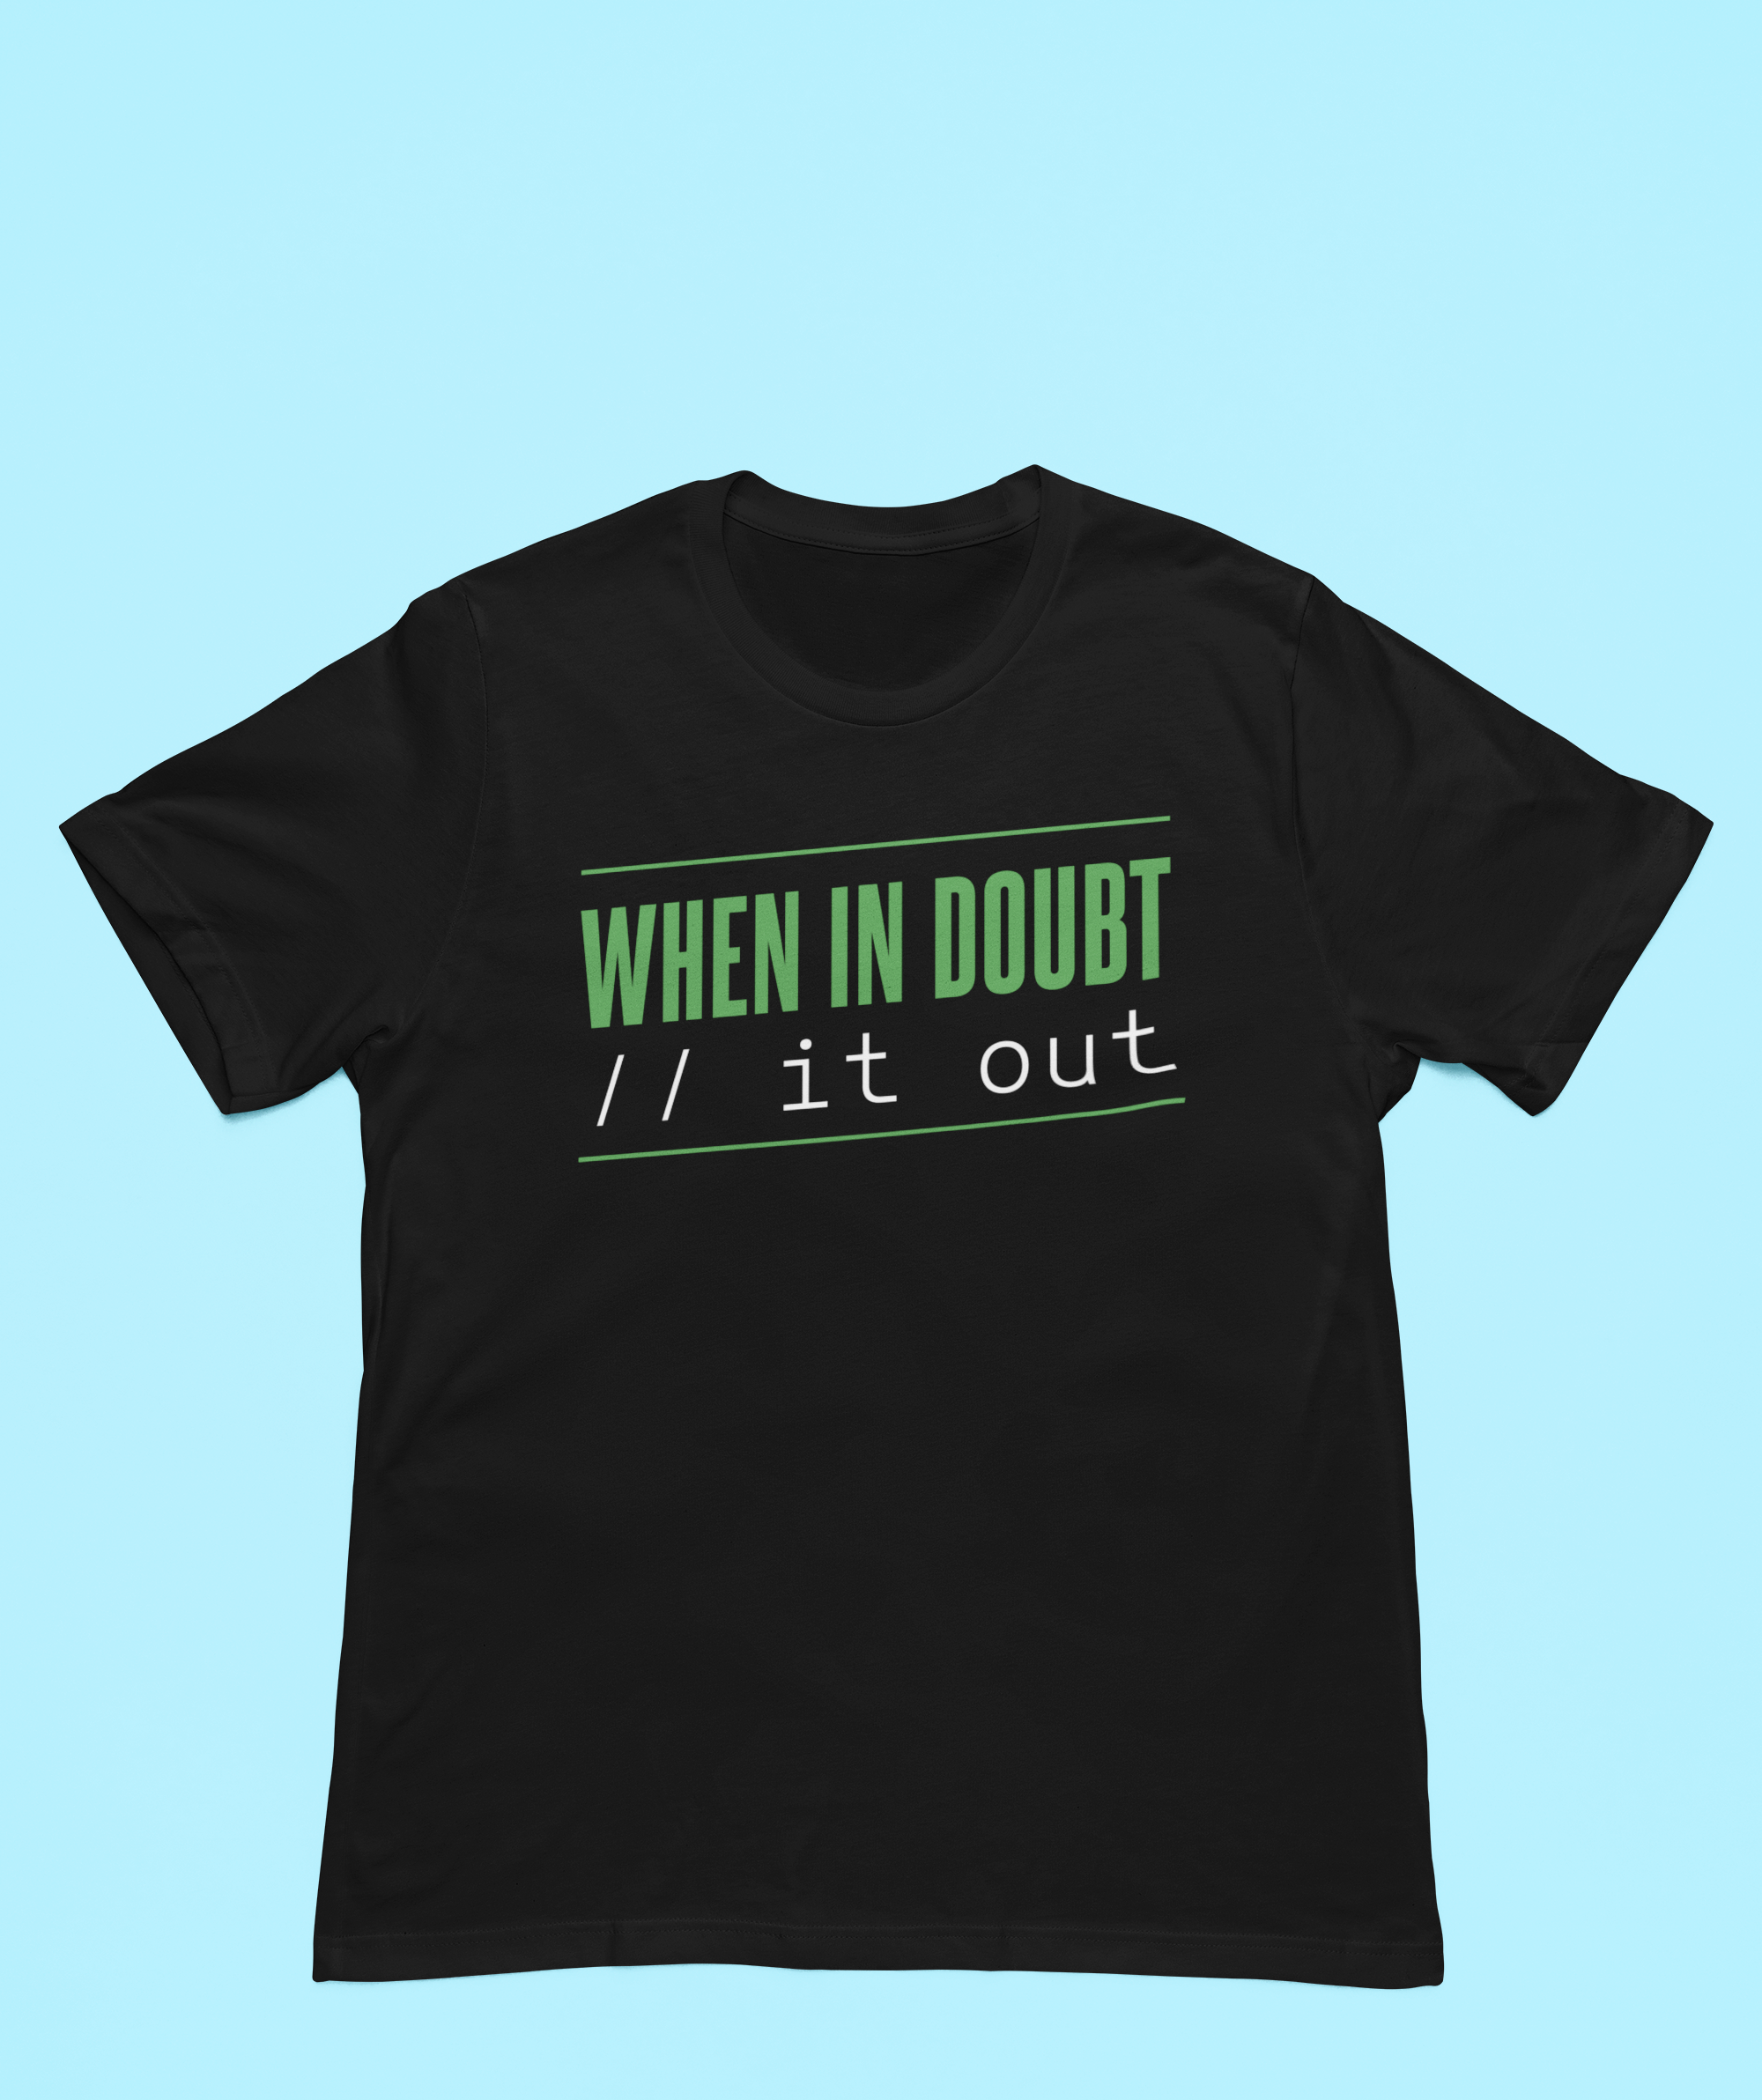 Black When In Doubt // it out T-Shirt with a cheeky design featuring the text printed on the front.